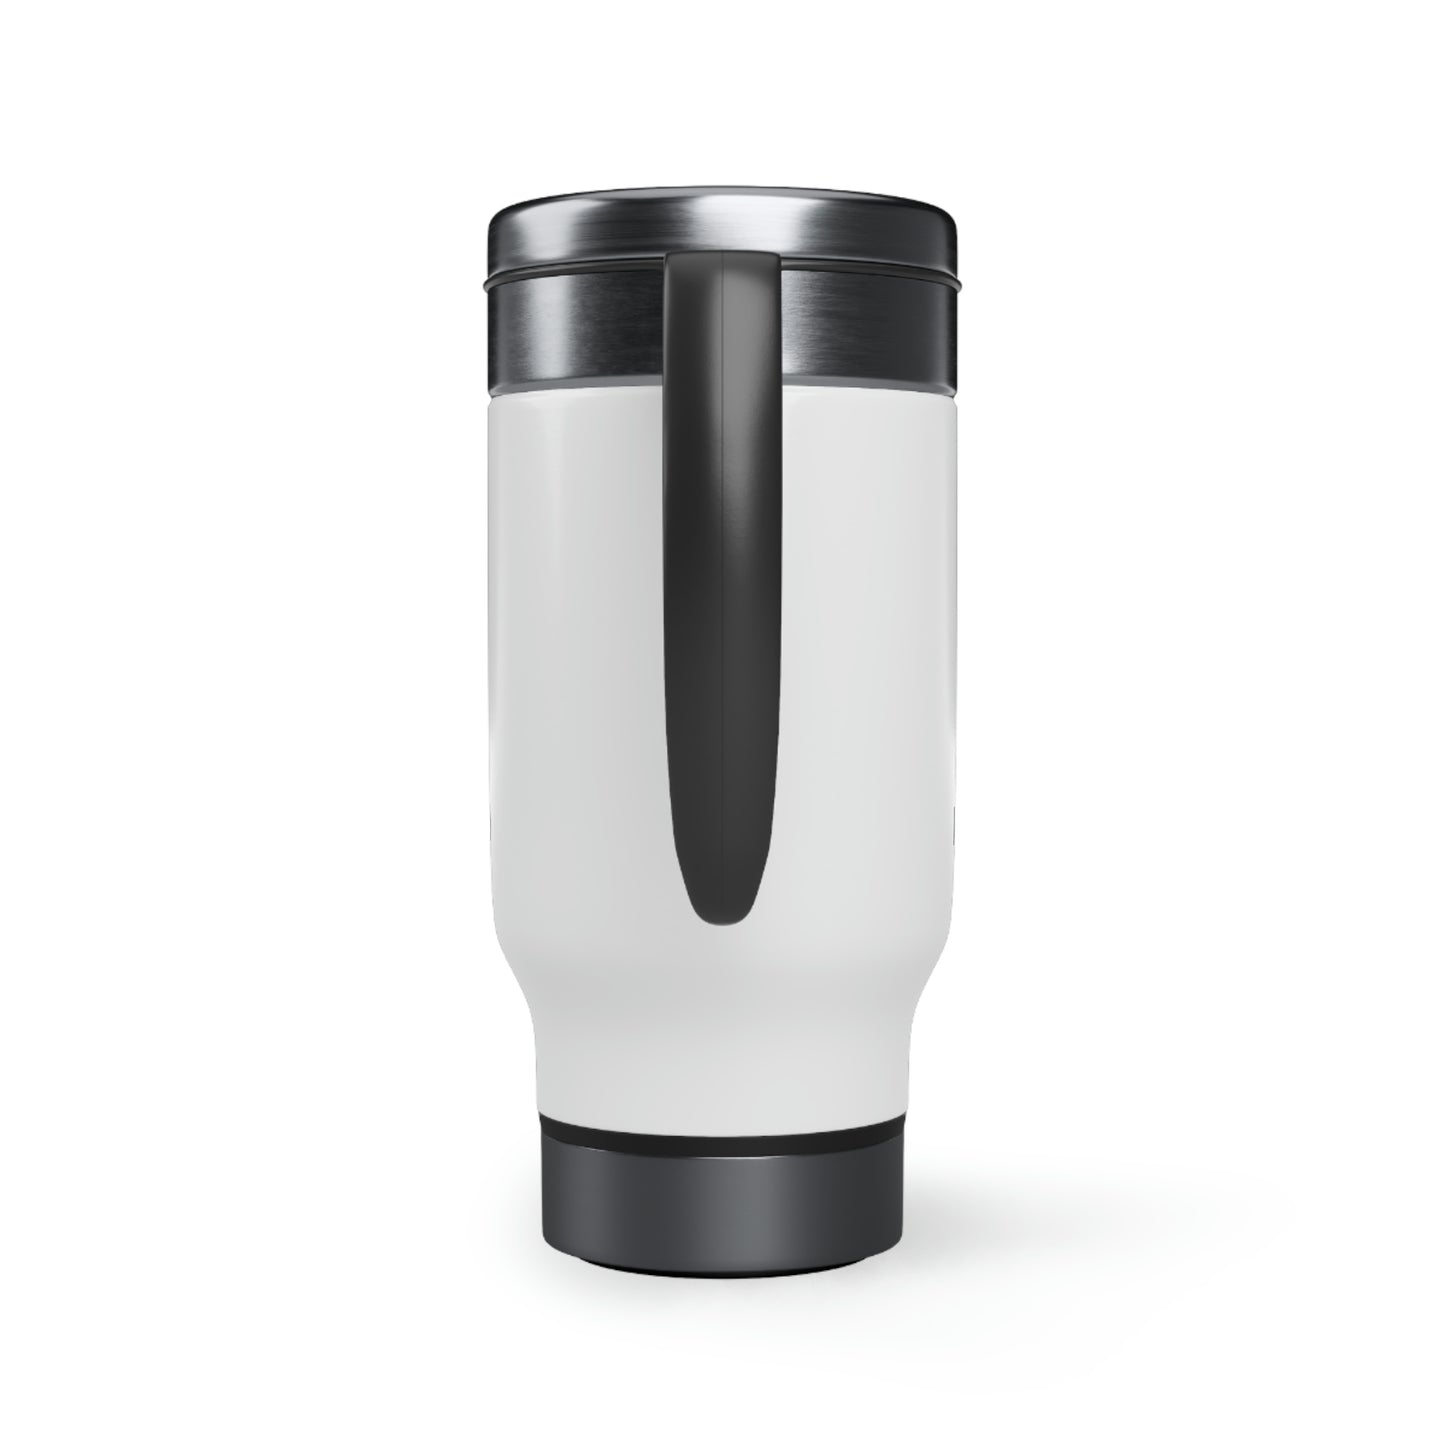 DC Mexican Food Stainless Steel Travel Mug with Handle, 14oz